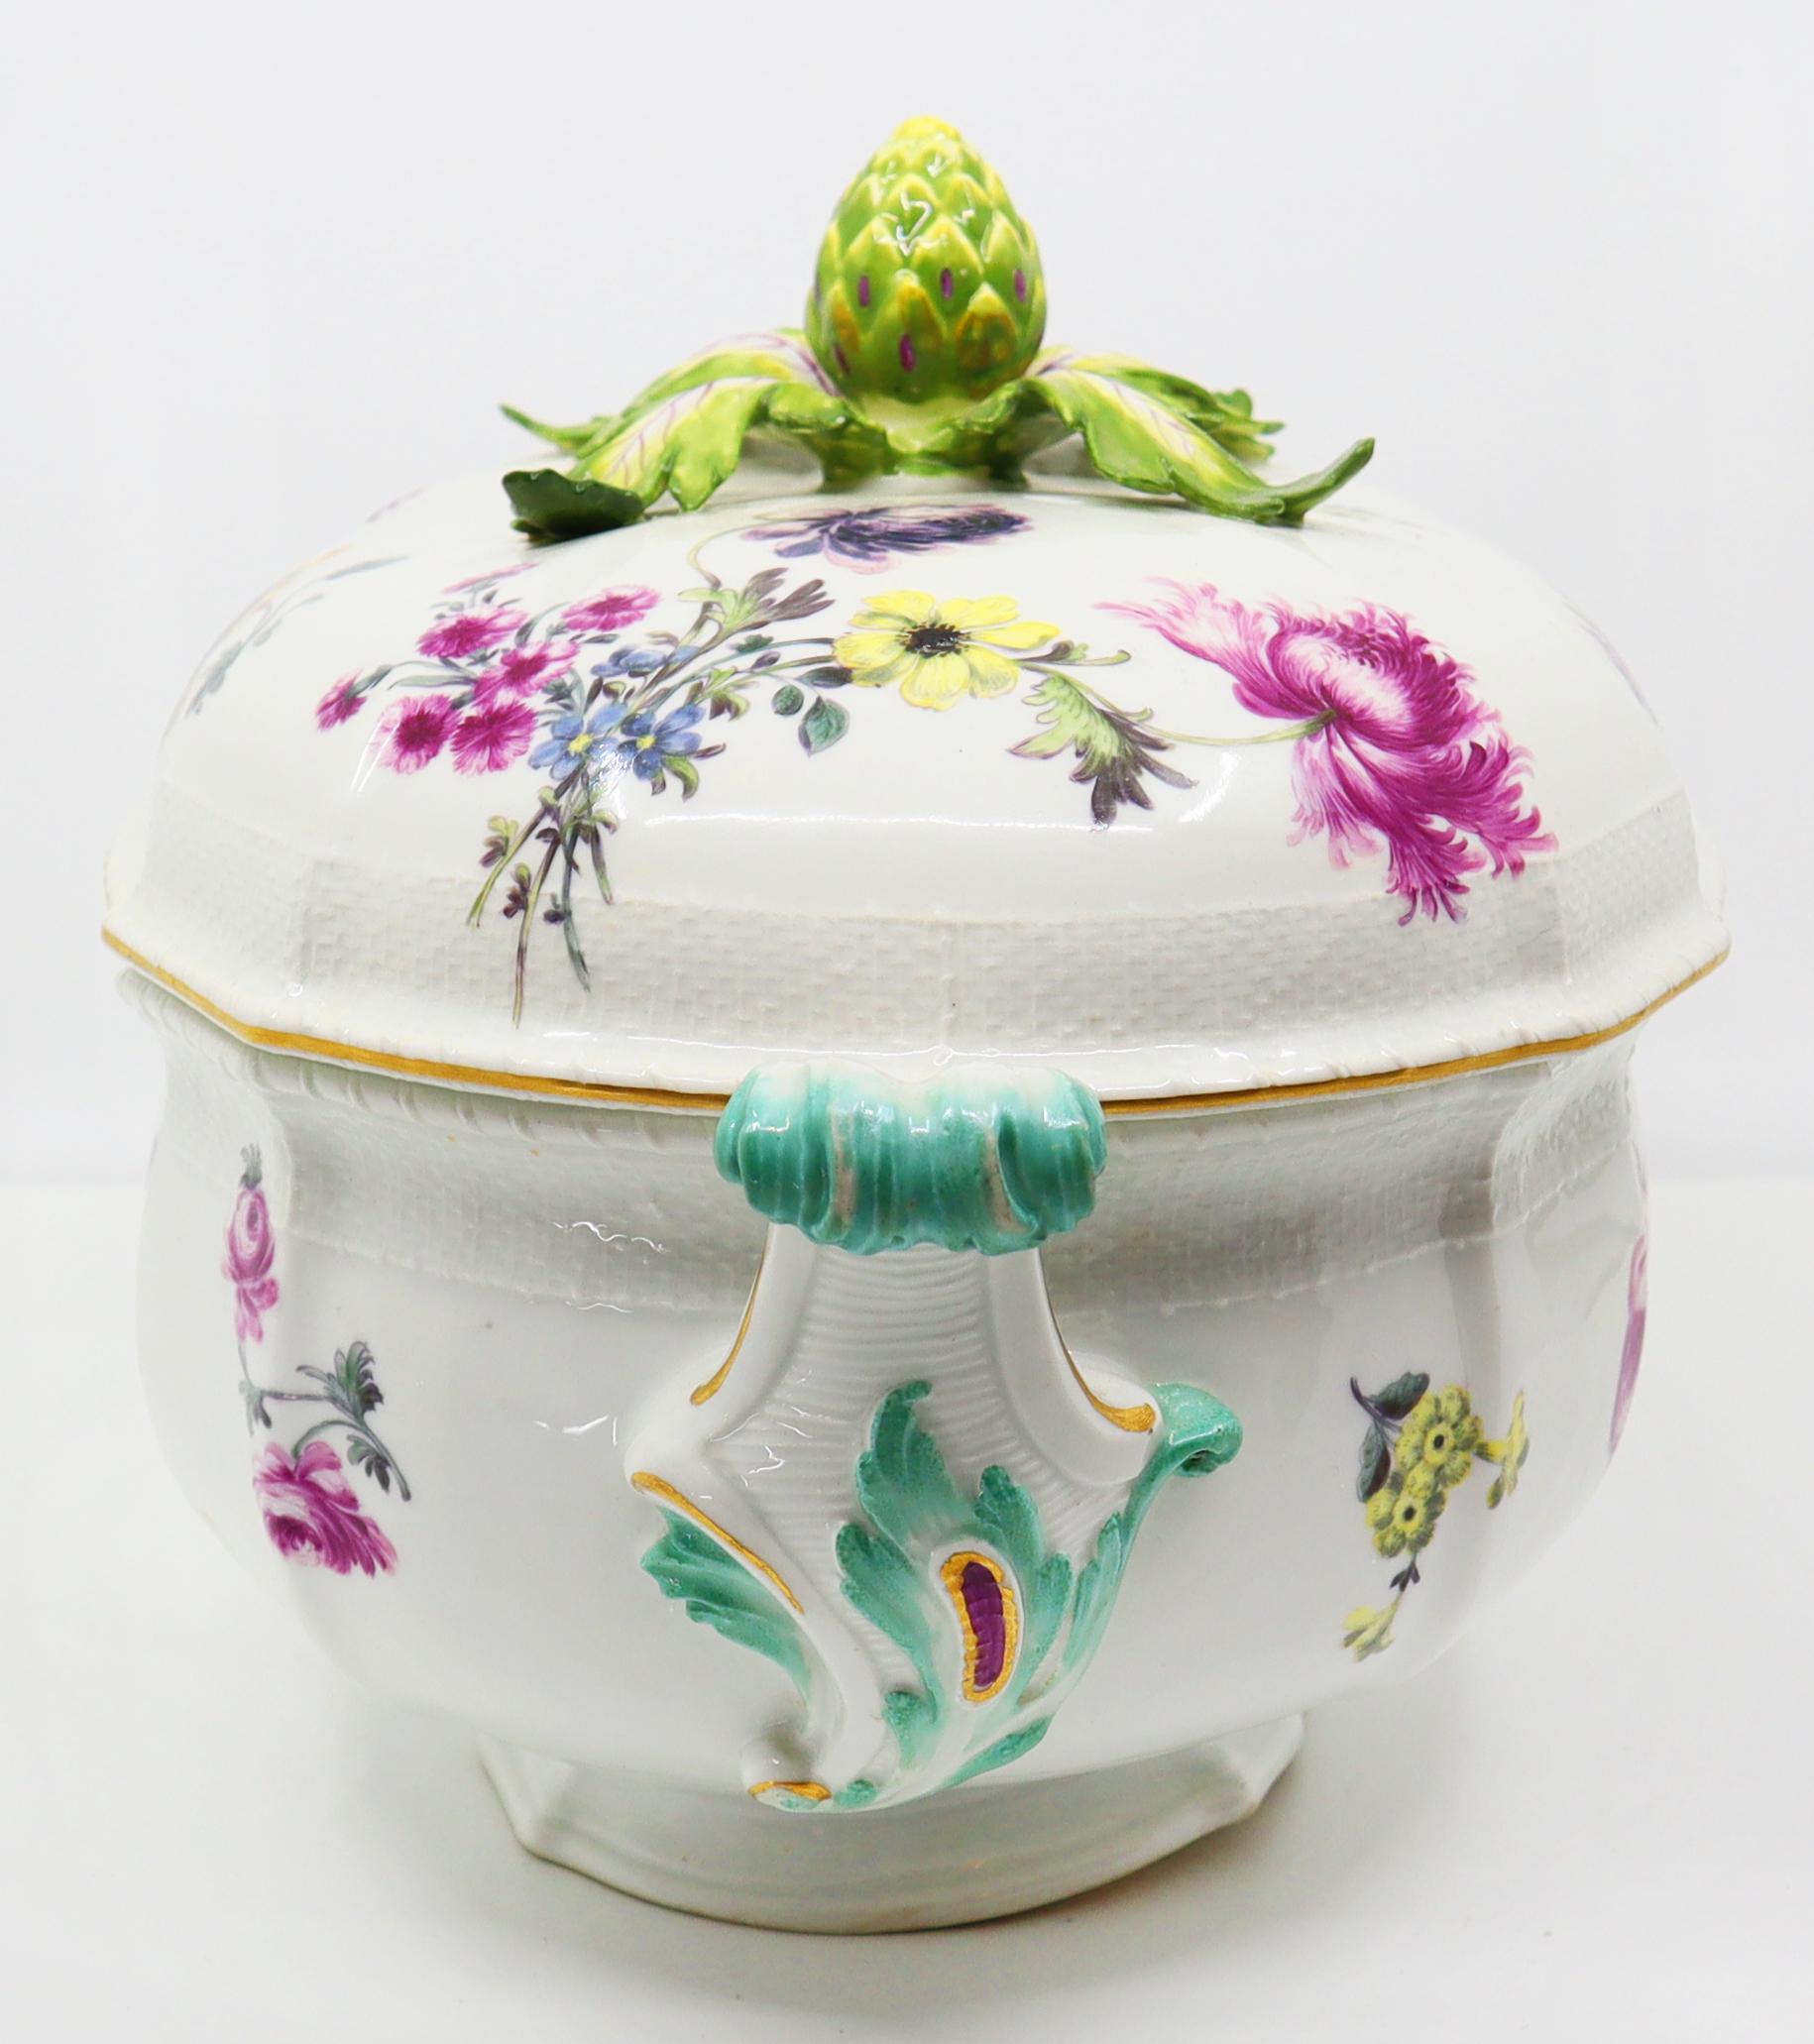 Beautiful coveted bowl, Meissen hand painted flowers and leaves with artichoke finial and turquoise painted handles,
Meissen, 19th century, in very good condition
Dimensions: 30 W x 18 H x 15 D (approximate).

*Shipping included 
Free and fast